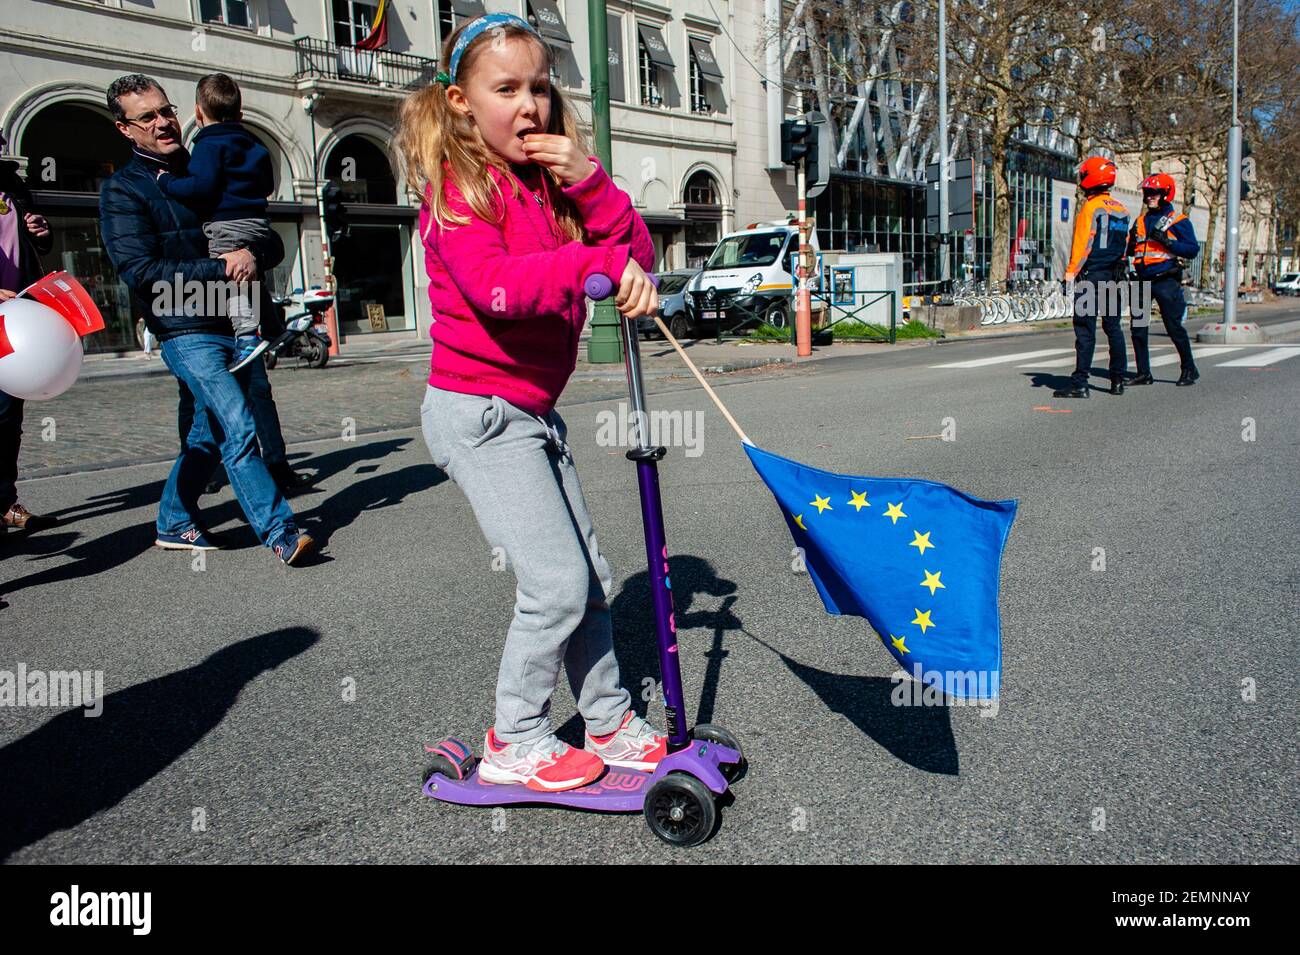 A girl is using a skateboard while is holding a EU flag during the March for Europe celebrated in Brussels, on March 24th, 2019. A day before the anniversary of the founding Treaty of the European Union, citizens and civil society organizations took the streets of Brussels to make a stand, two months before the European elections. The march was organized by Together platform, an initiative launched by an alliance of progressive political groups from across Europe. They stand for solidarity, democracy, and peace against the real threat to their core European values.(Photo by Romy Fernandez/Sipa Stock Photo